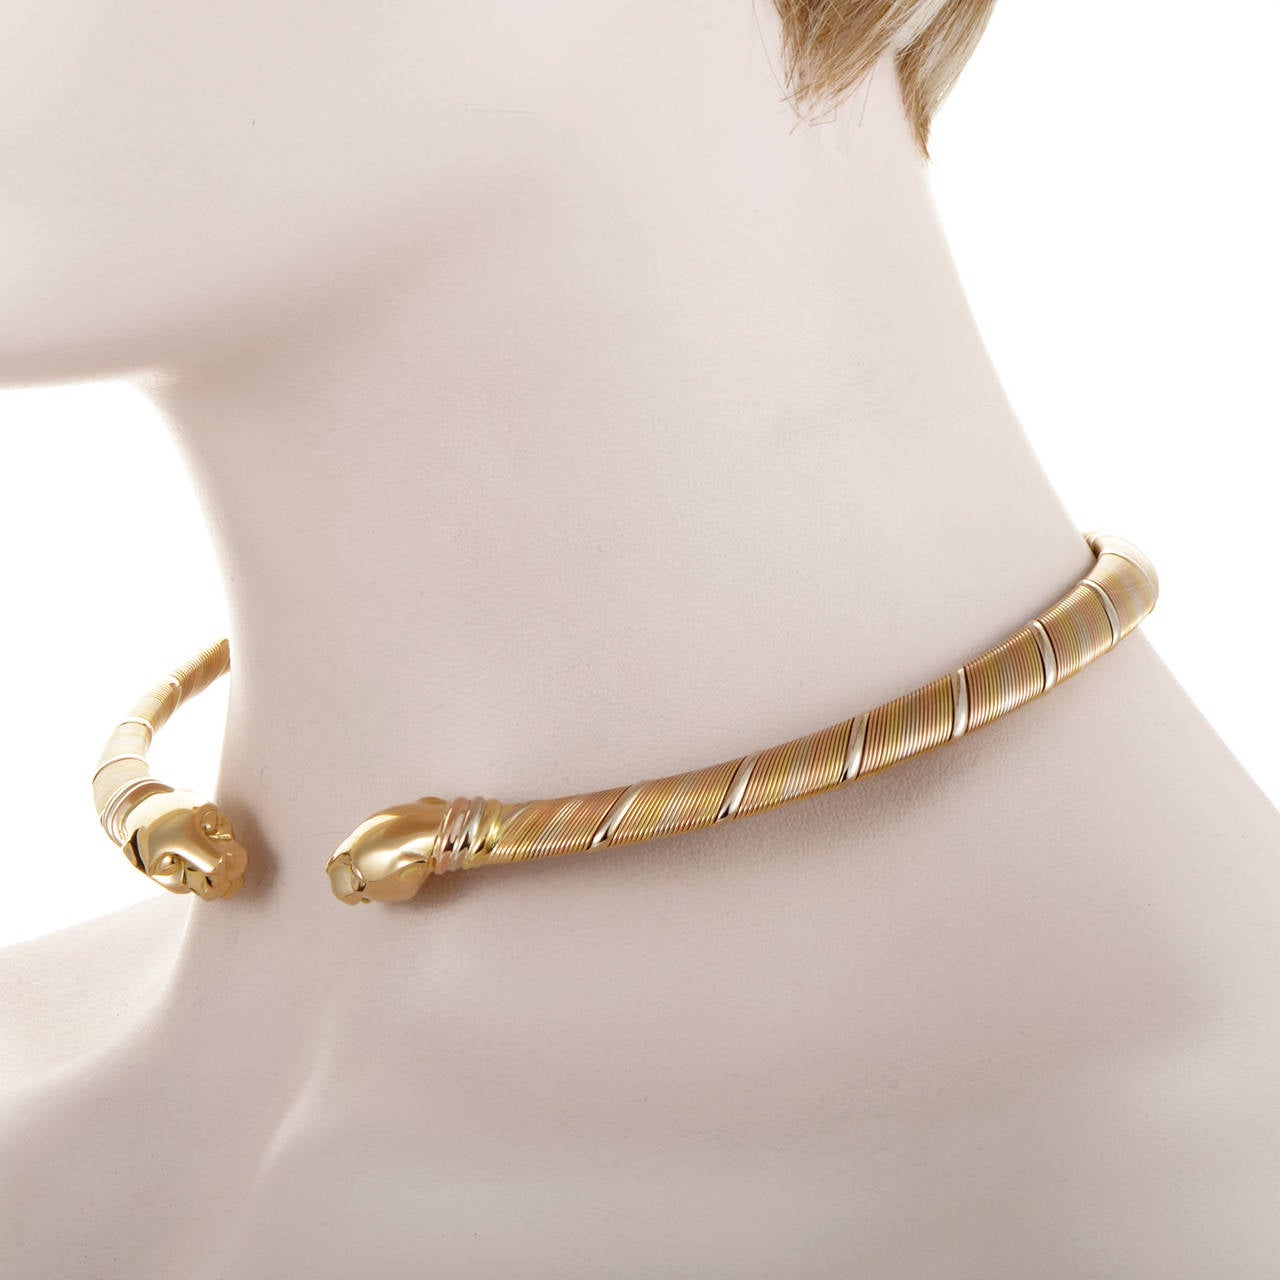 Women's Cartier Panthere Tricolor Gold Choker Necklace